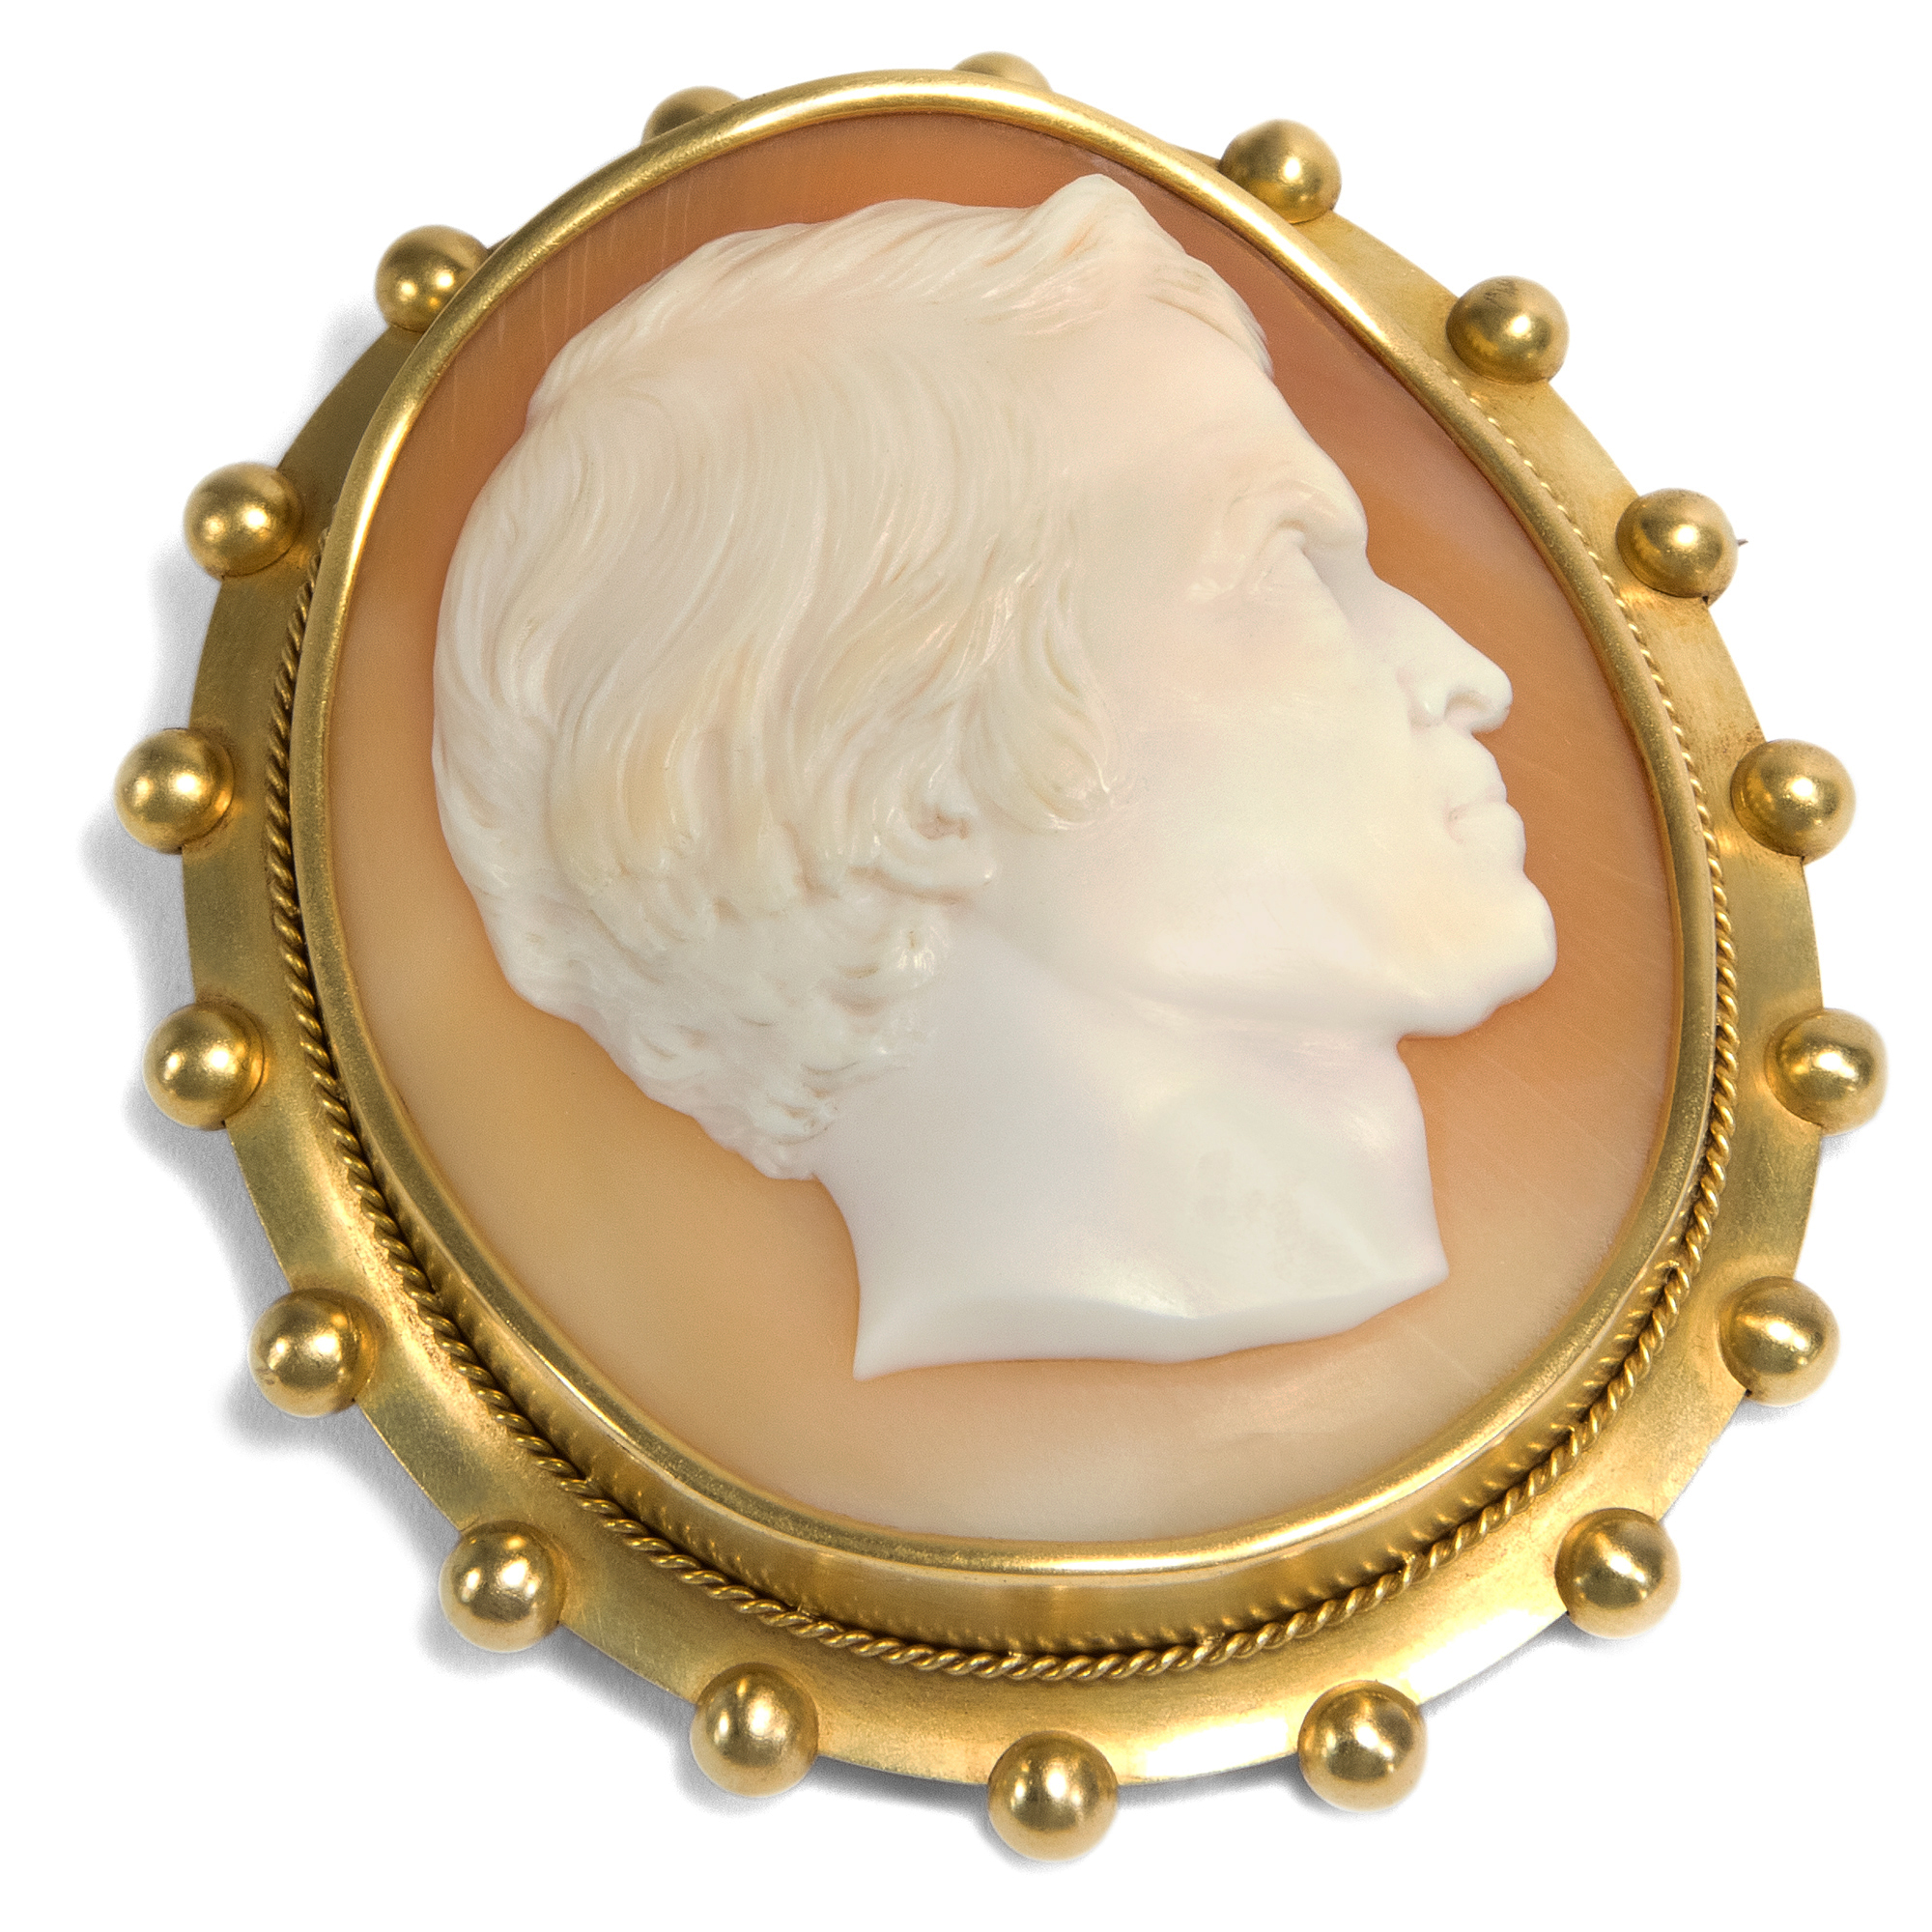 Large Victorian Shell Cameo With Portrait in Gold Setting, c. 1870